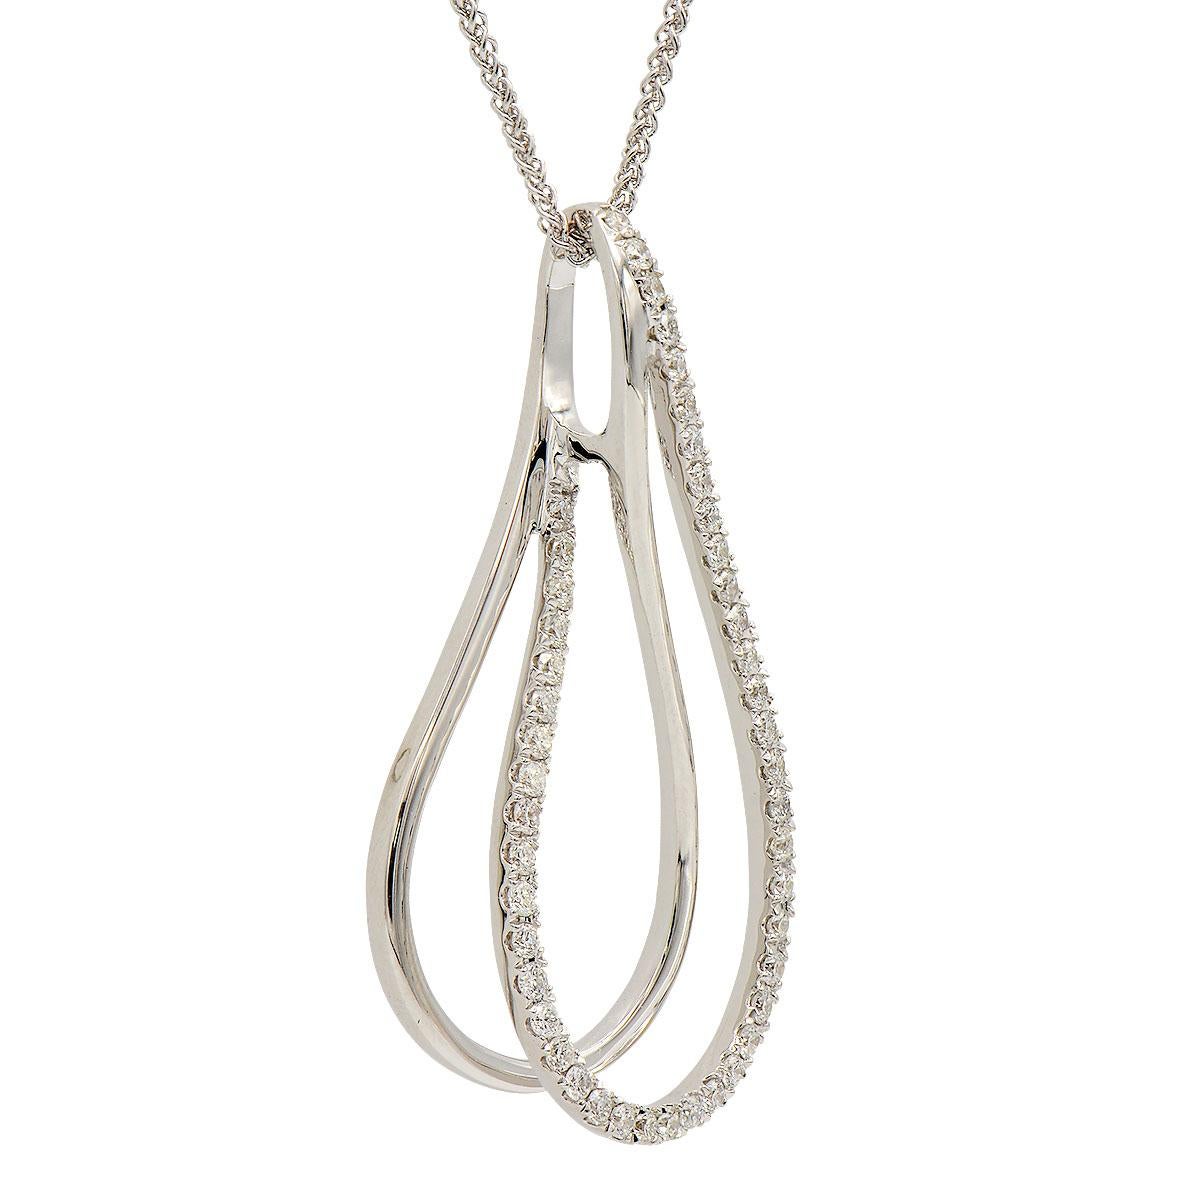 This beautiful pendant is made of 46 round VS2, G color diamonds totaling 0.36 carats to create a unique layered tear-drop design. The diamonds are set in 2.8 grams of 18 karat white gold. An 18 inch, 18 karat white gold chain is included as well.